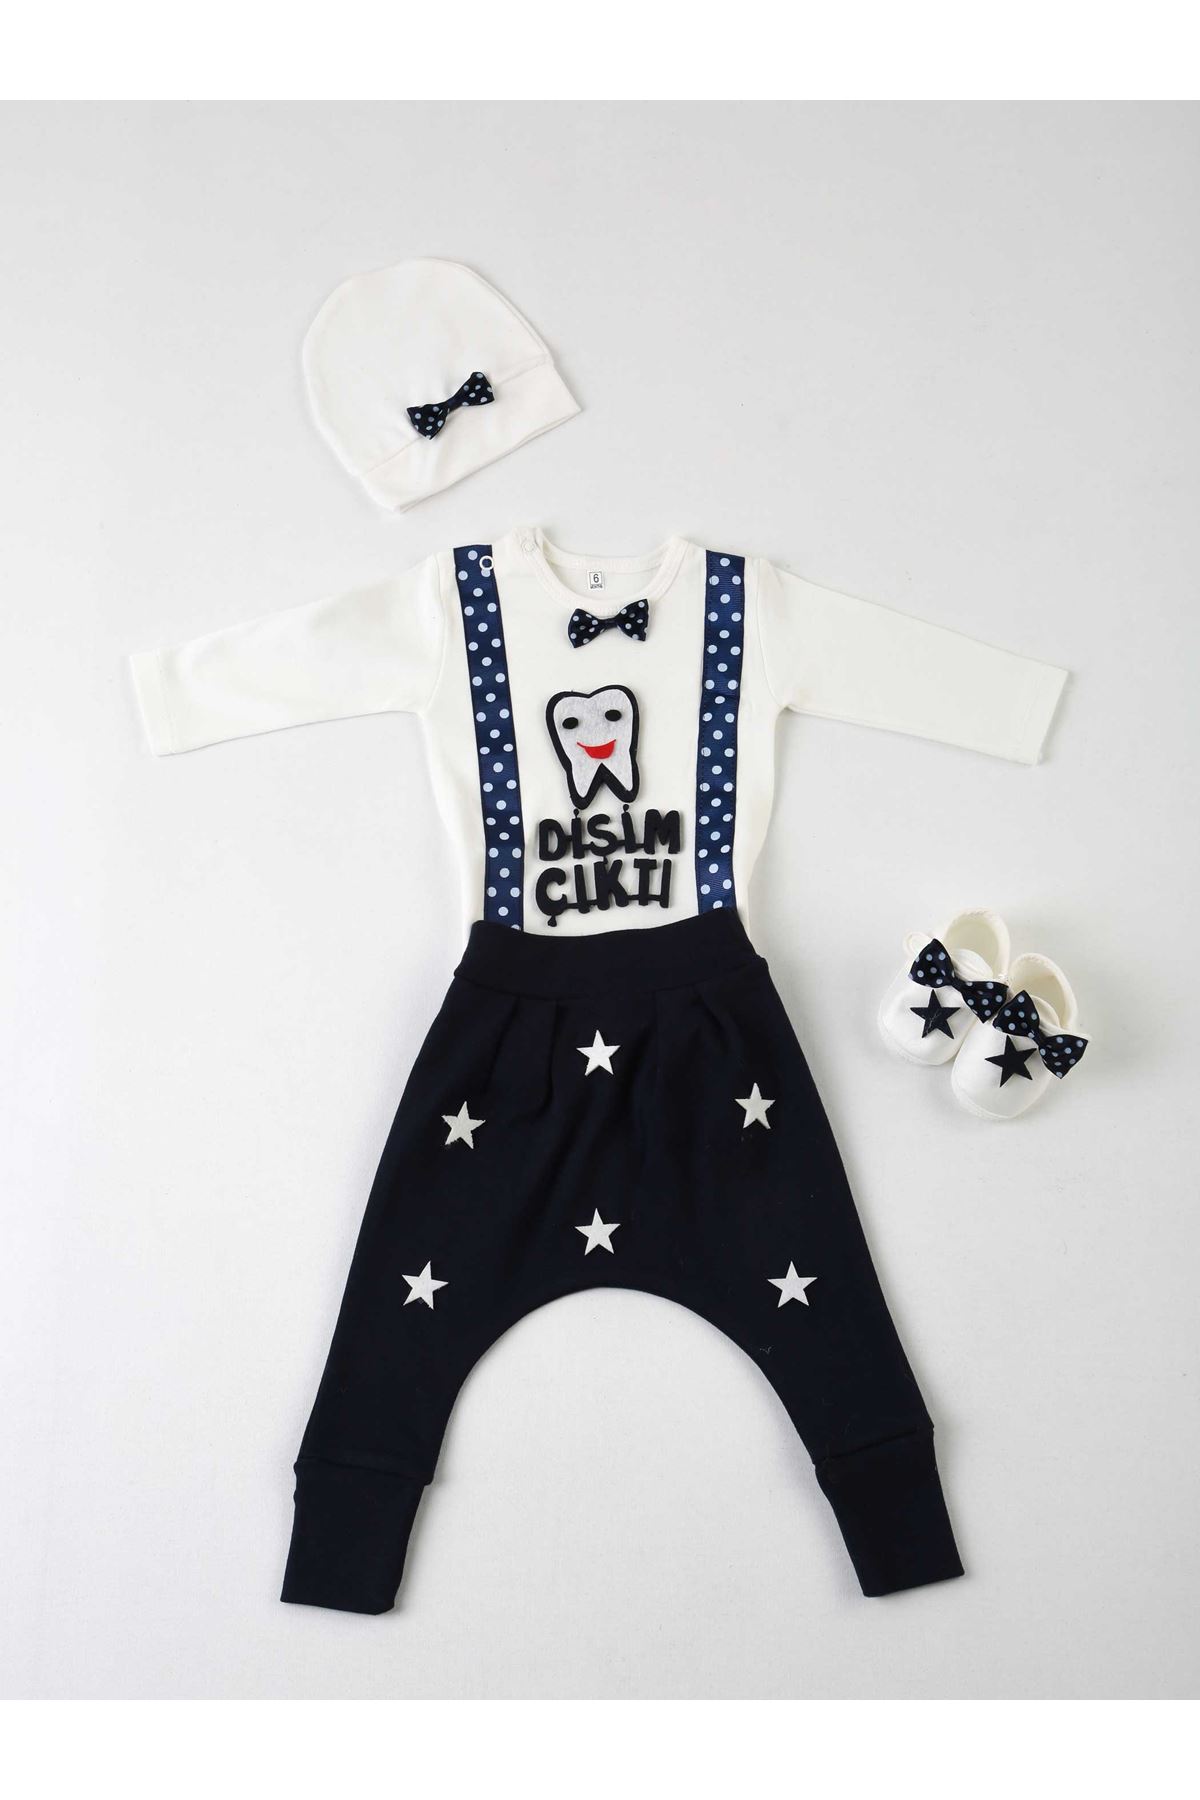 Navy Blue Tooth Output 4 Piece Baby Suit